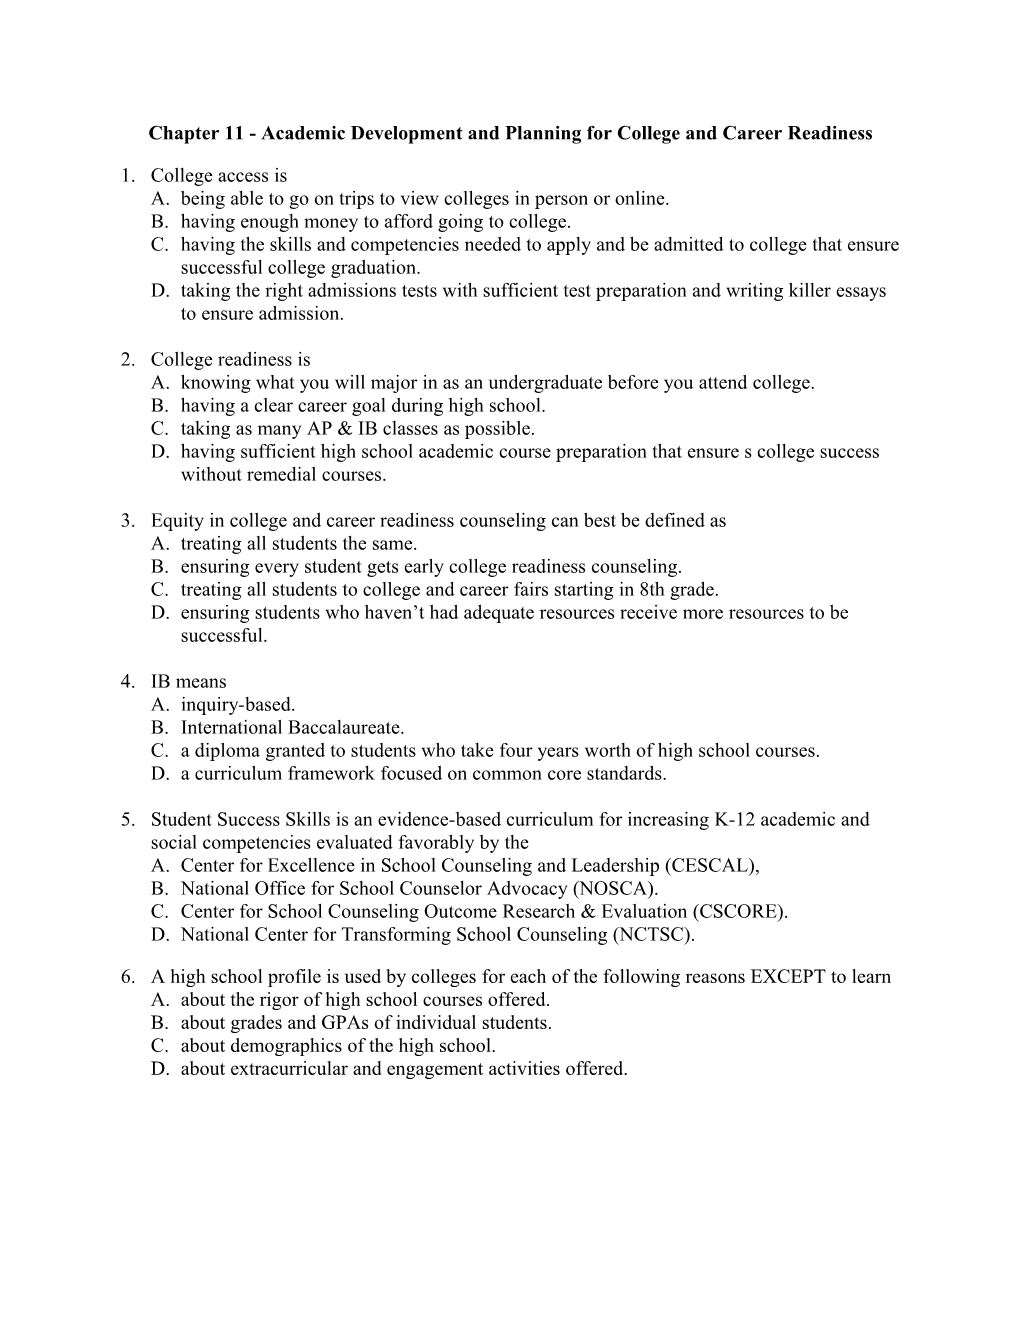 Chapter 11 - Academic Development and Planning for College and Career Readiness